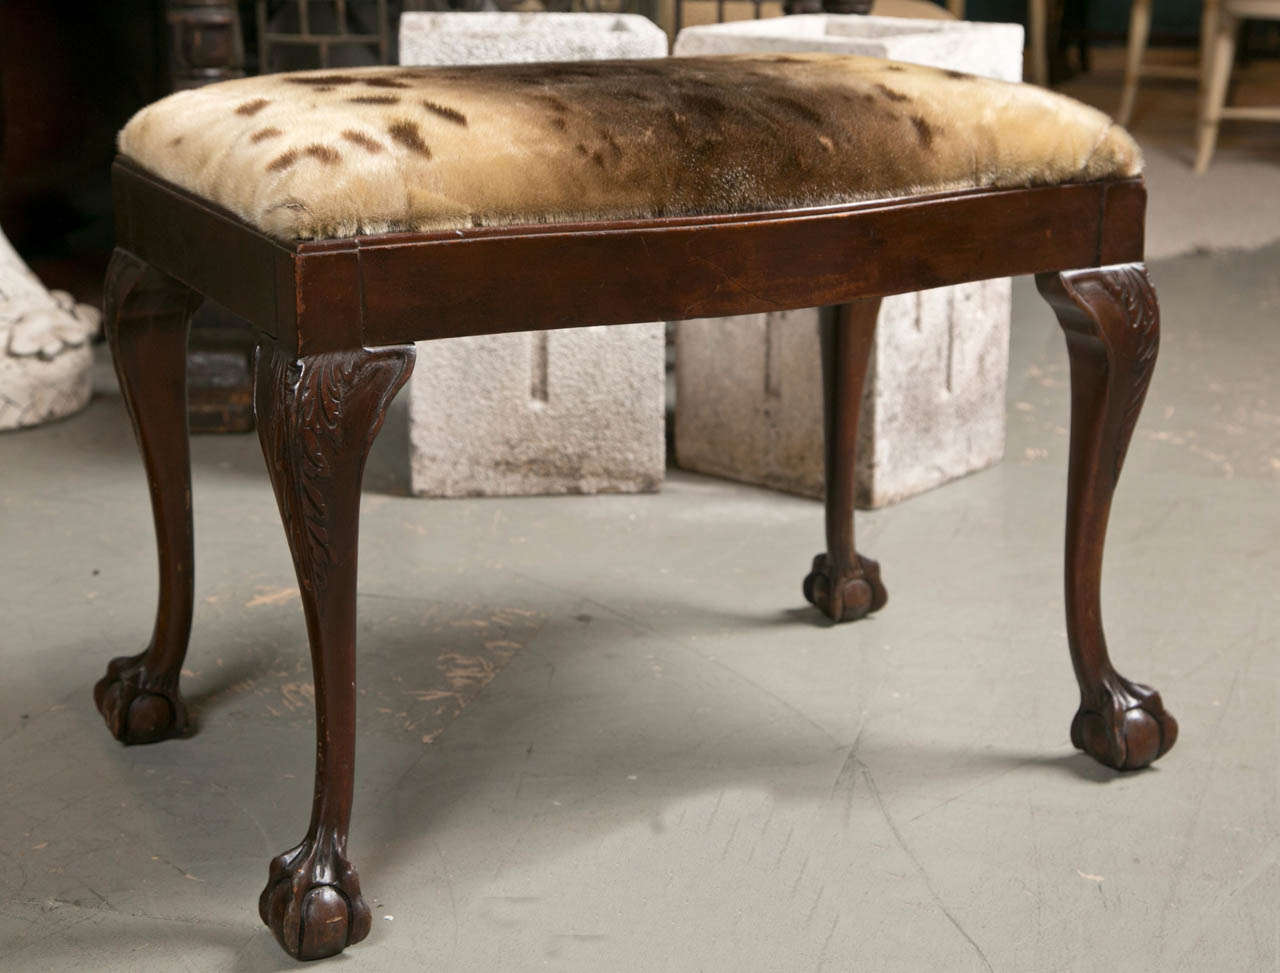 Great English stool with great detail. Seat upholstered with deer skin.